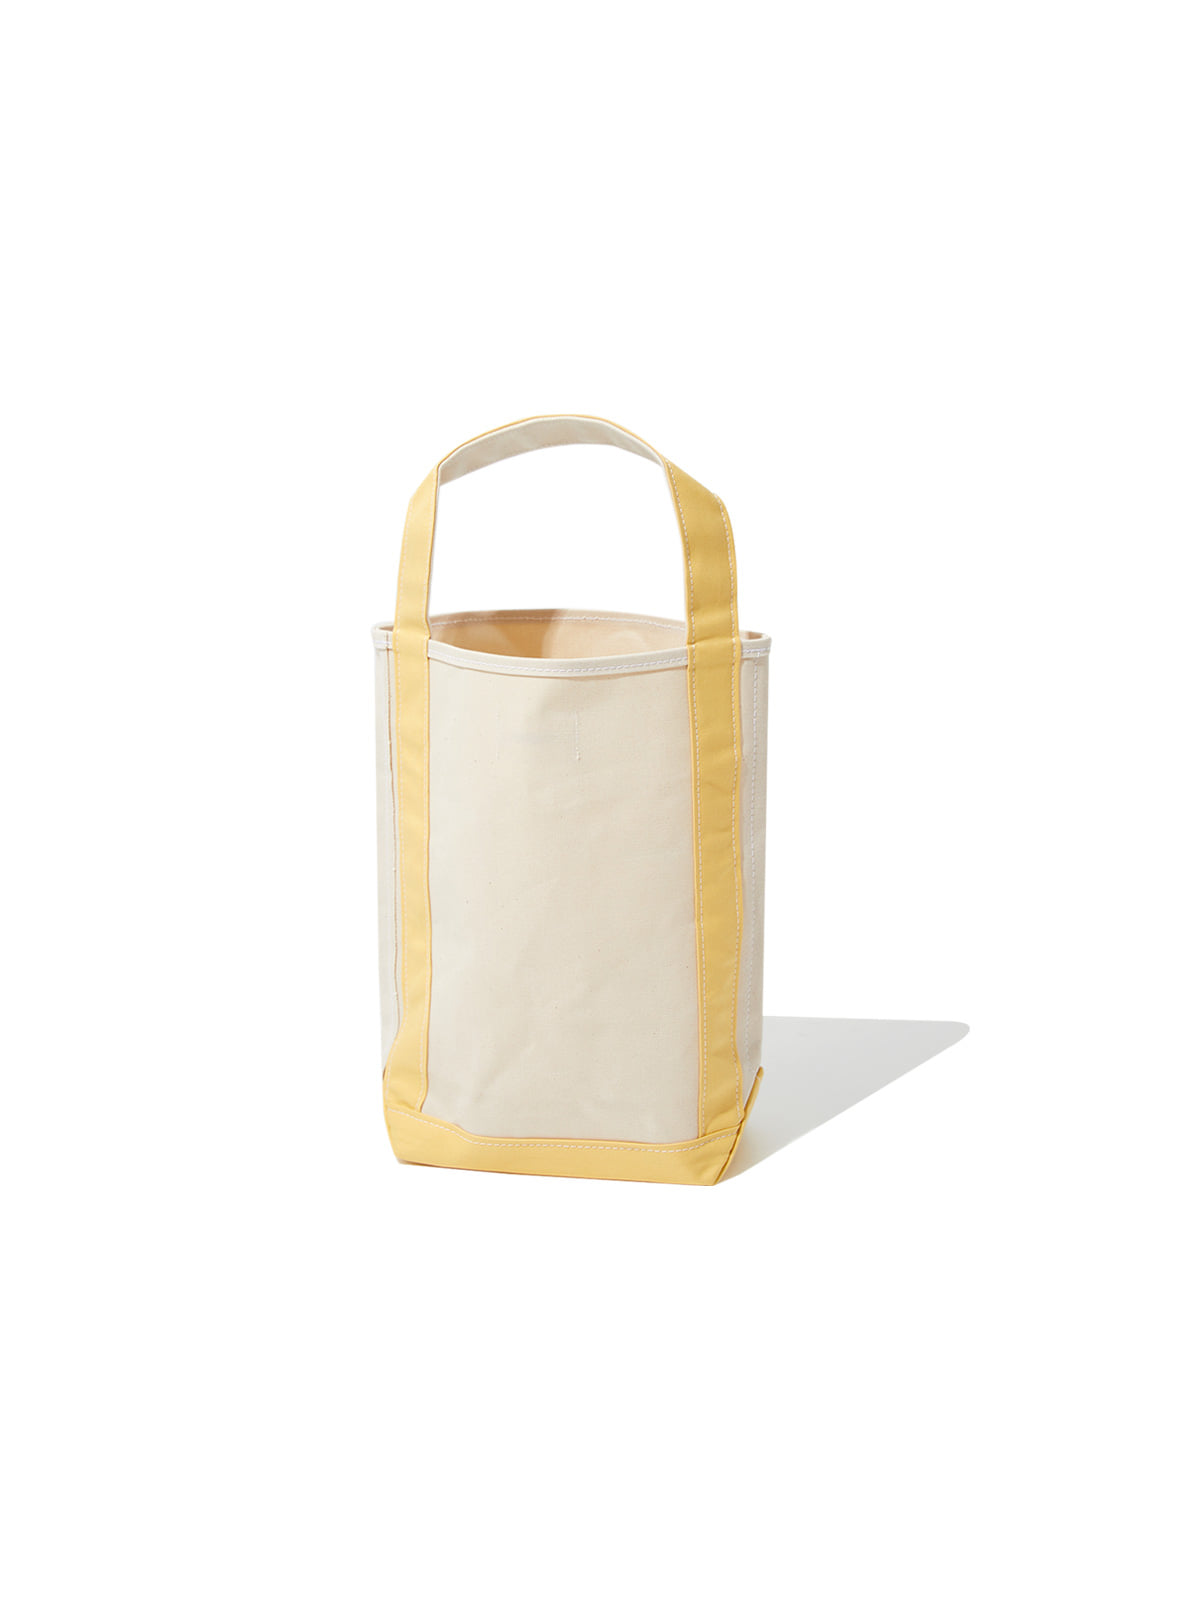 BAGUETTE TOTE SMALL (NATURAL/EGG)